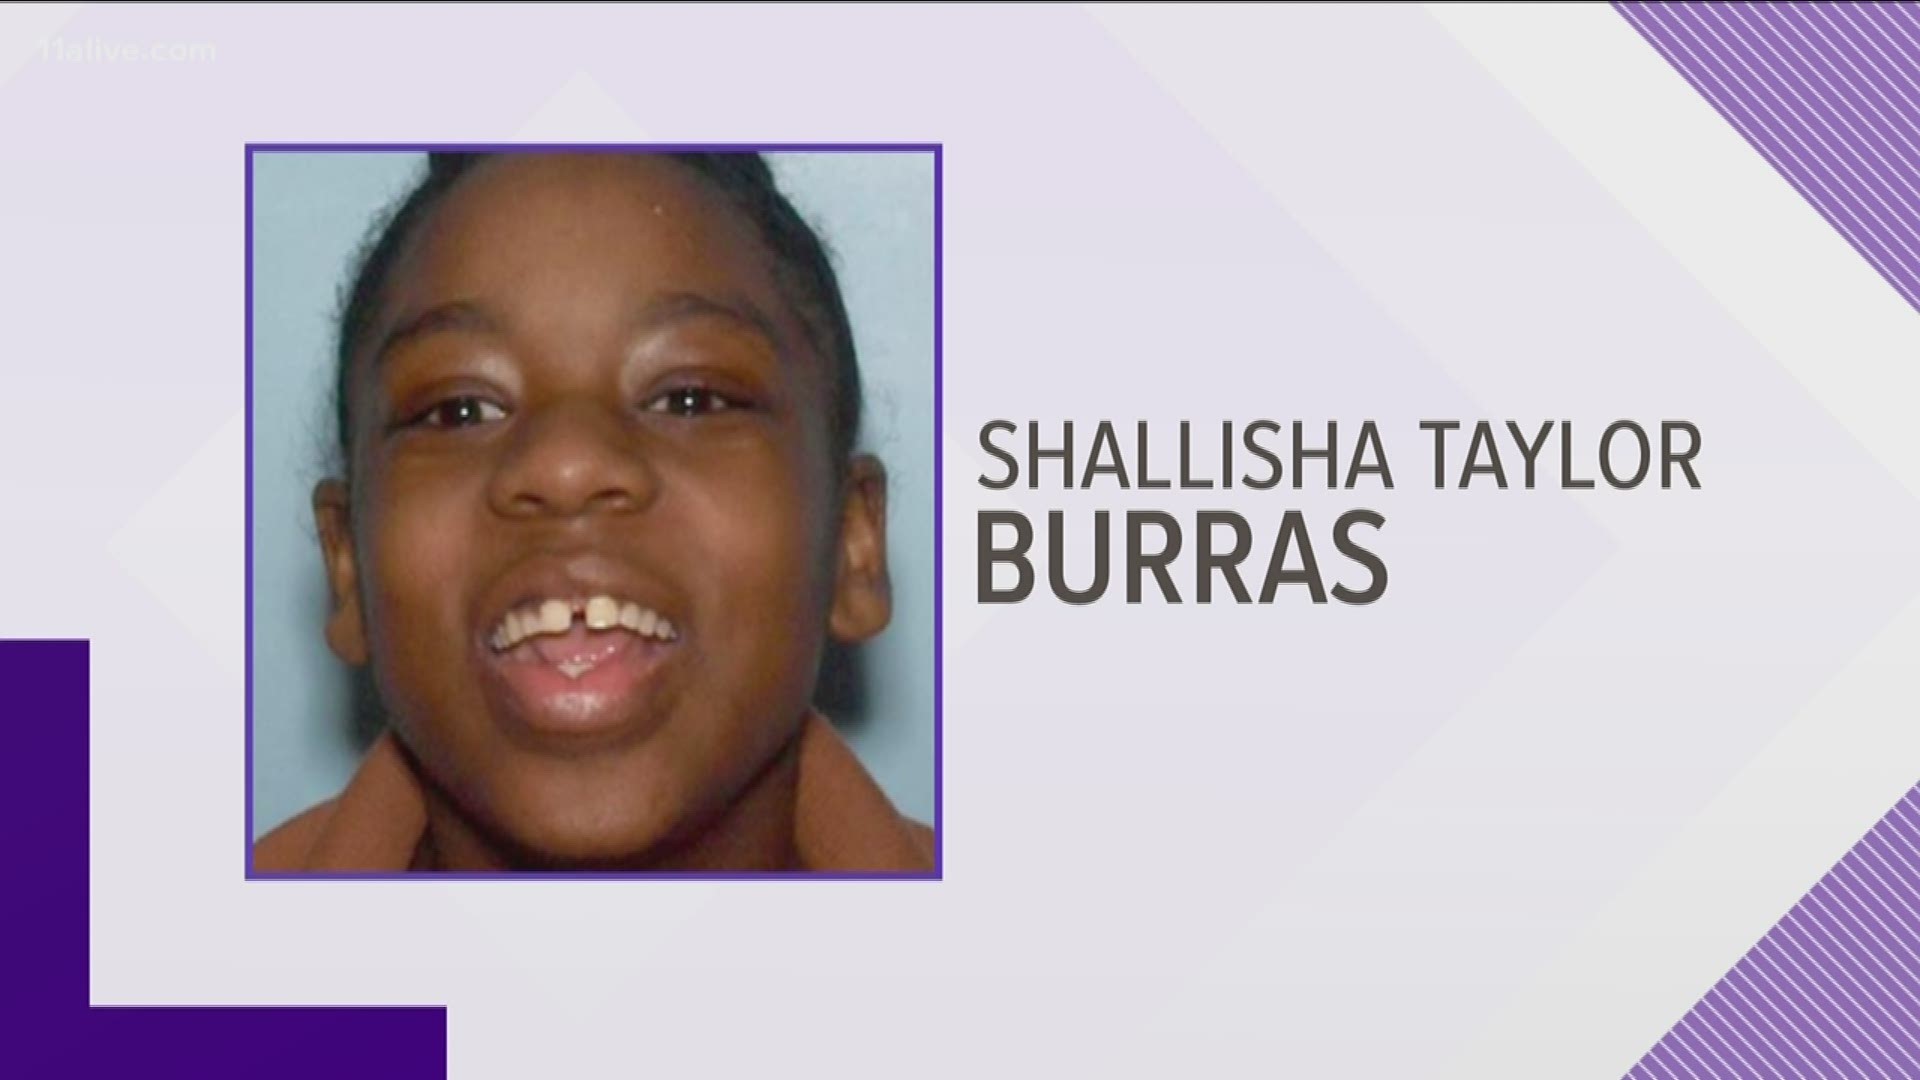 Atlanta Police are asking for the public's help in locating Sallisha Burras who was last seen July 14 at her Southeast Atlanta home.